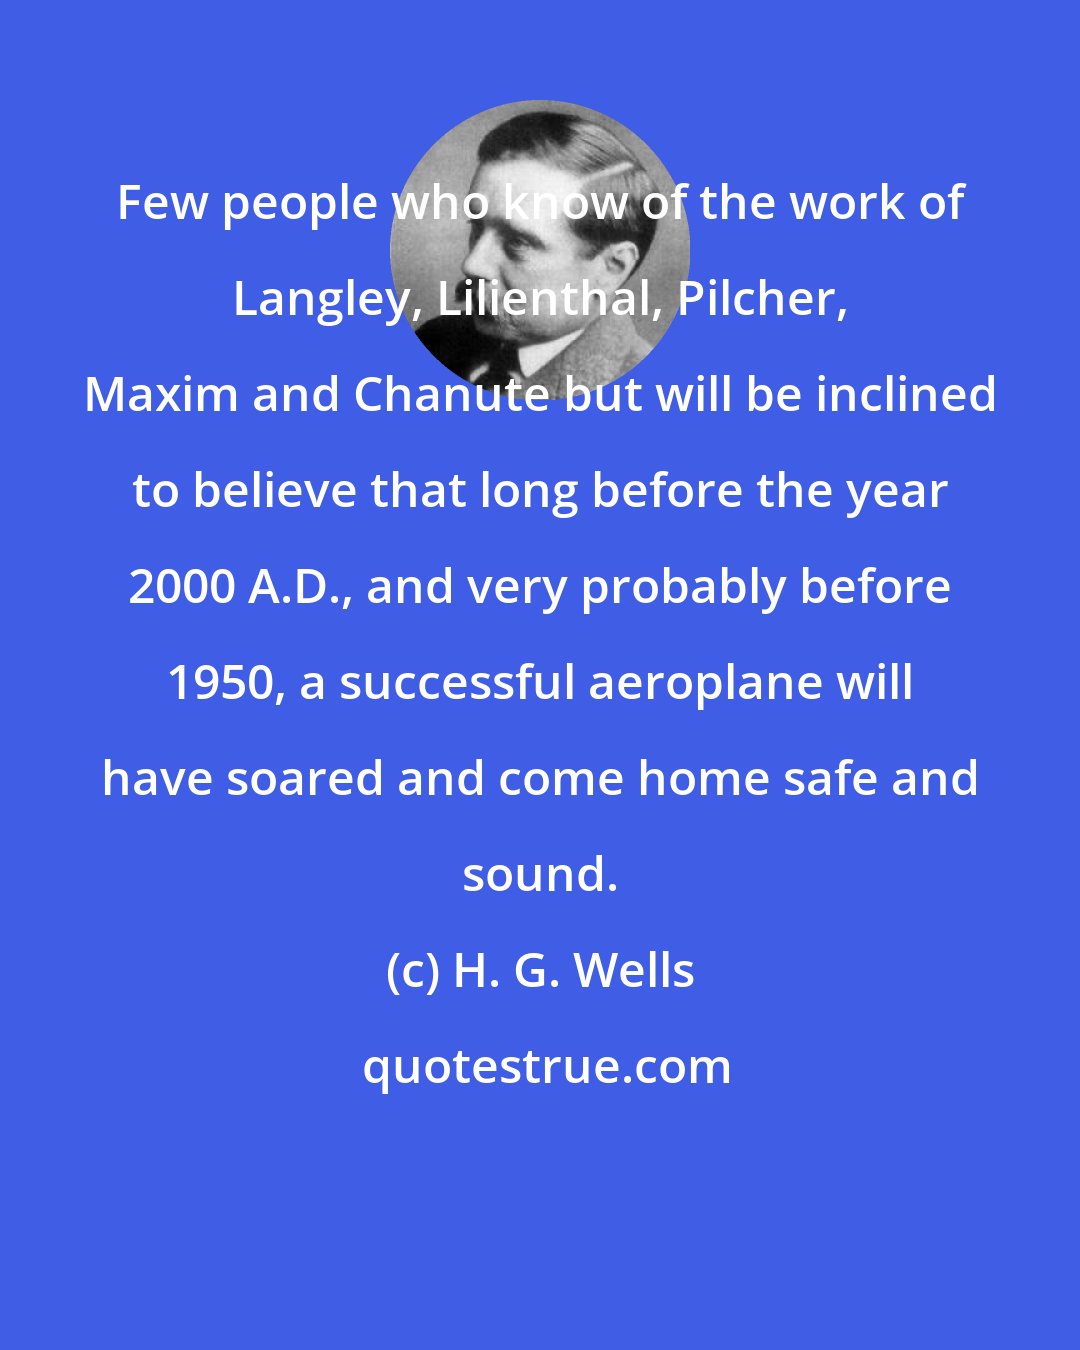 H. G. Wells: Few people who know of the work of Langley, Lilienthal, Pilcher, Maxim and Chanute but will be inclined to believe that long before the year 2000 A.D., and very probably before 1950, a successful aeroplane will have soared and come home safe and sound.